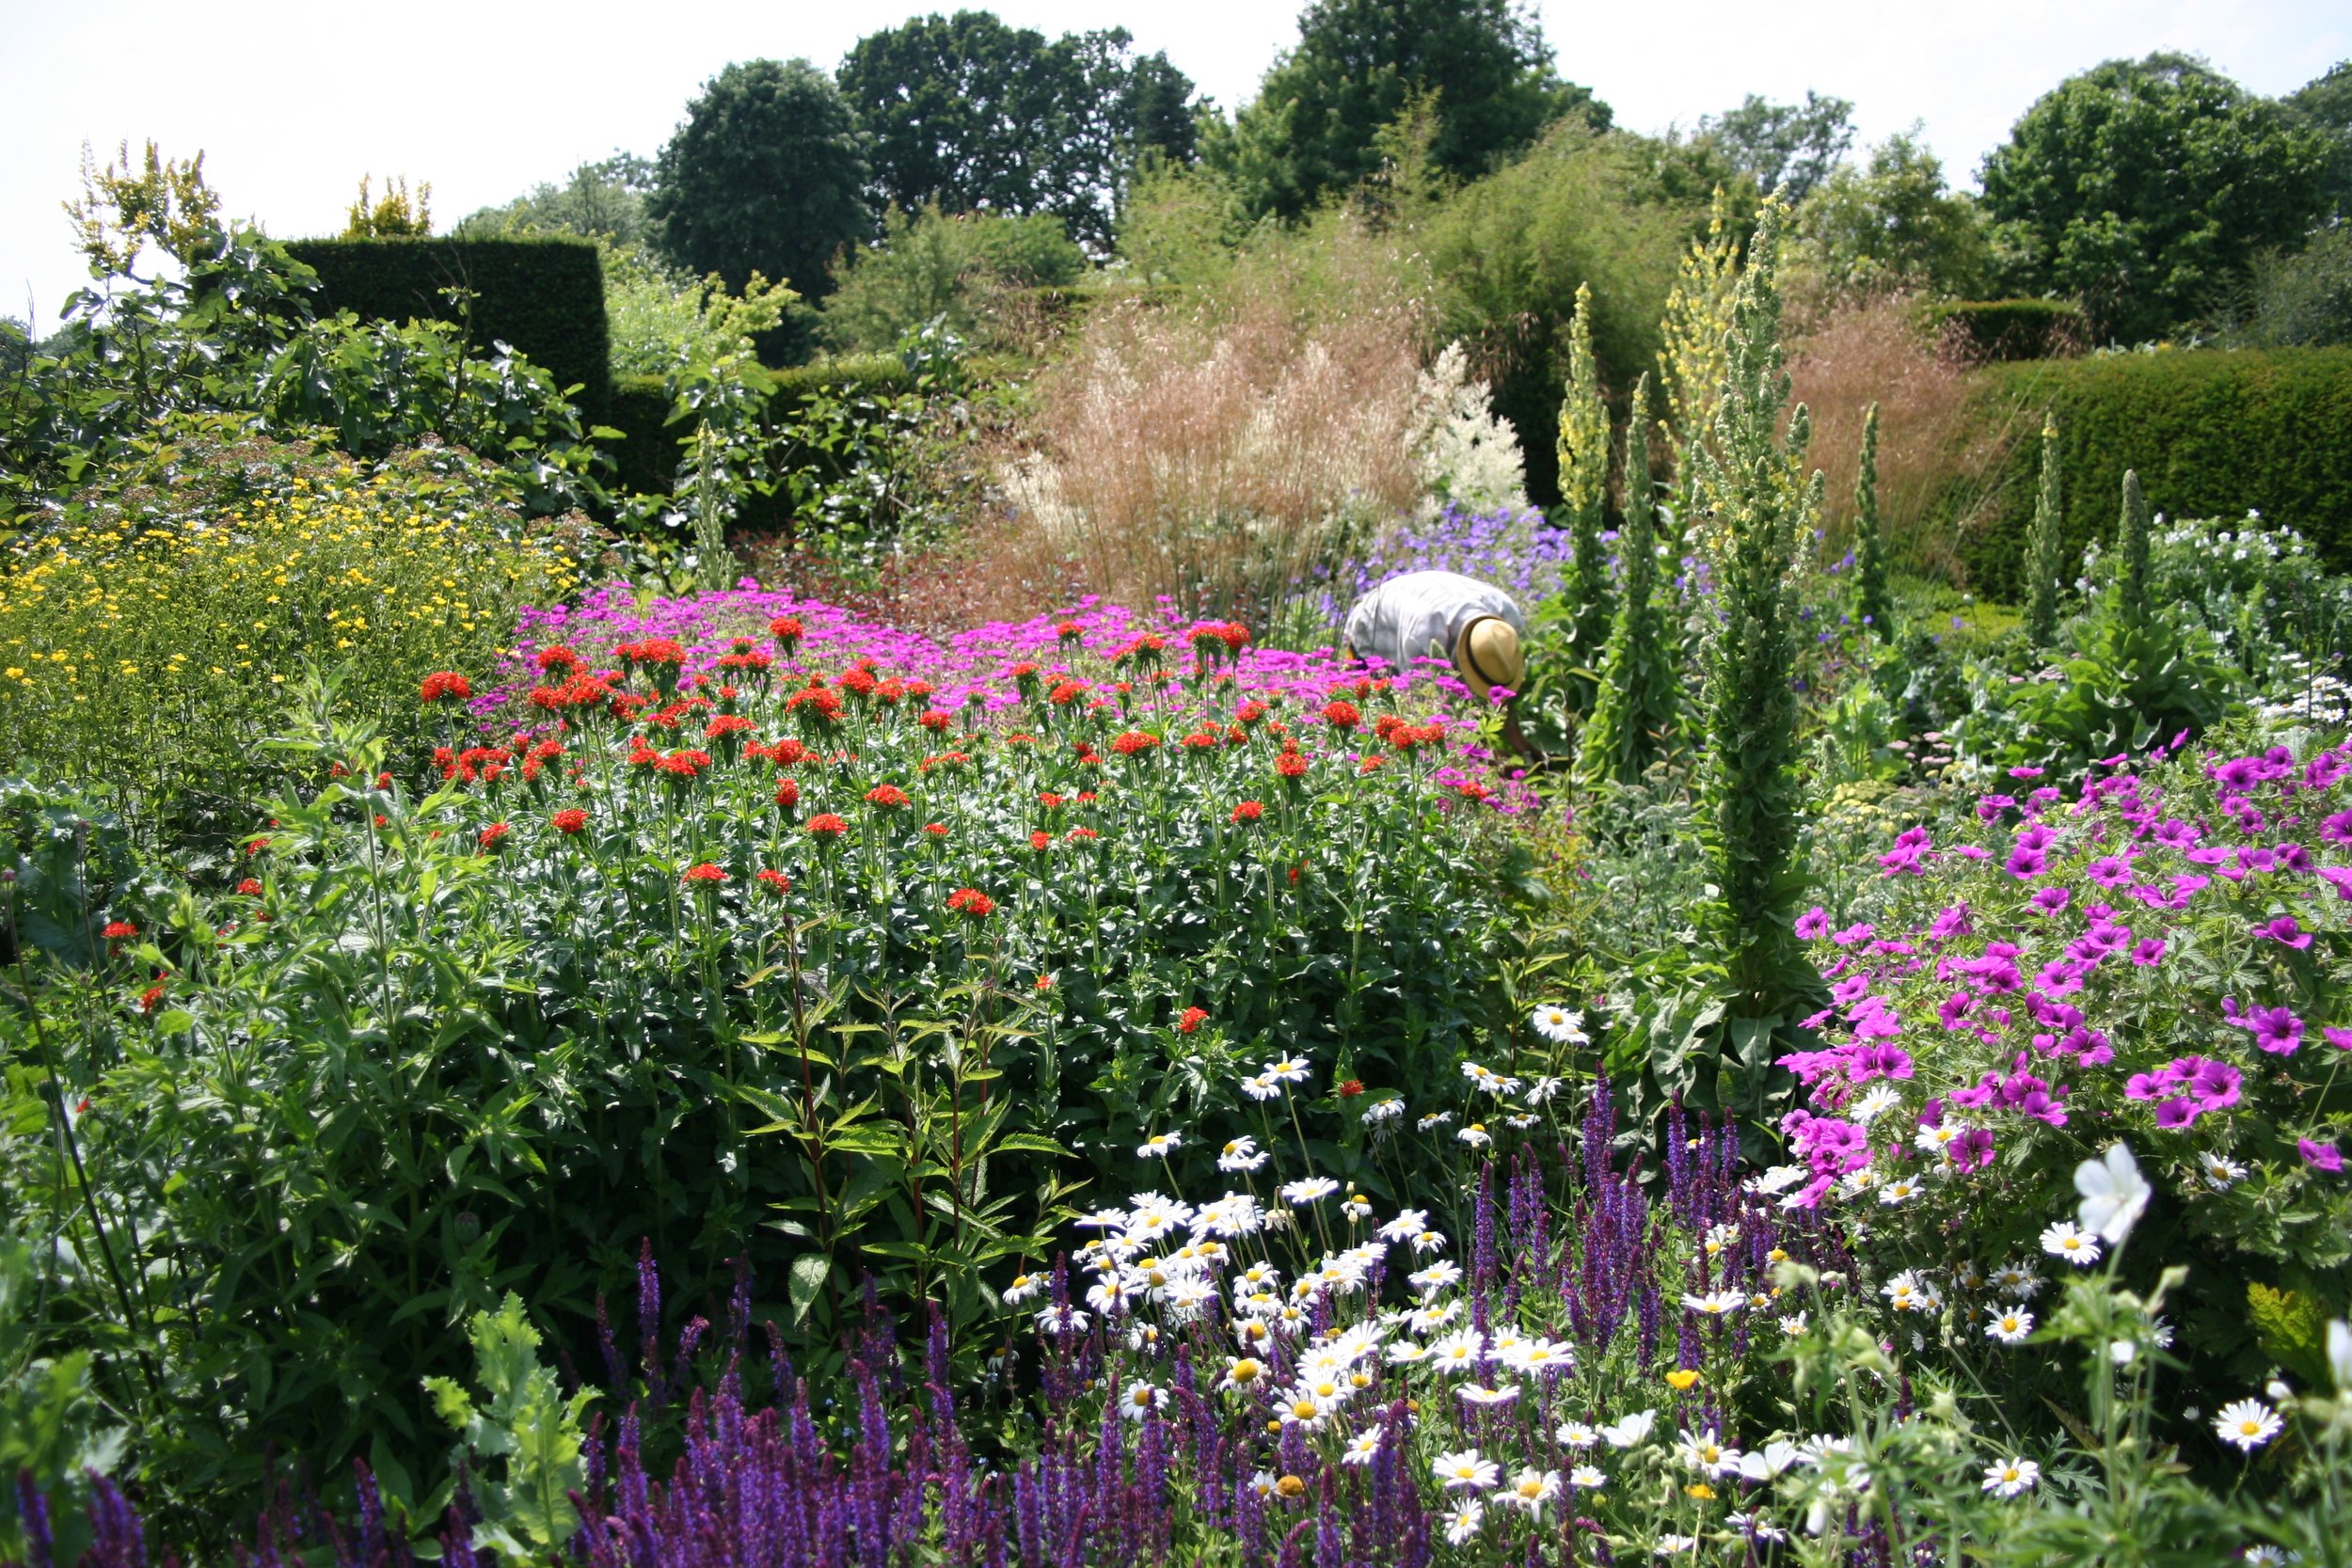 A garden, full of greenery and colorful blooms. (photo © Bell House)